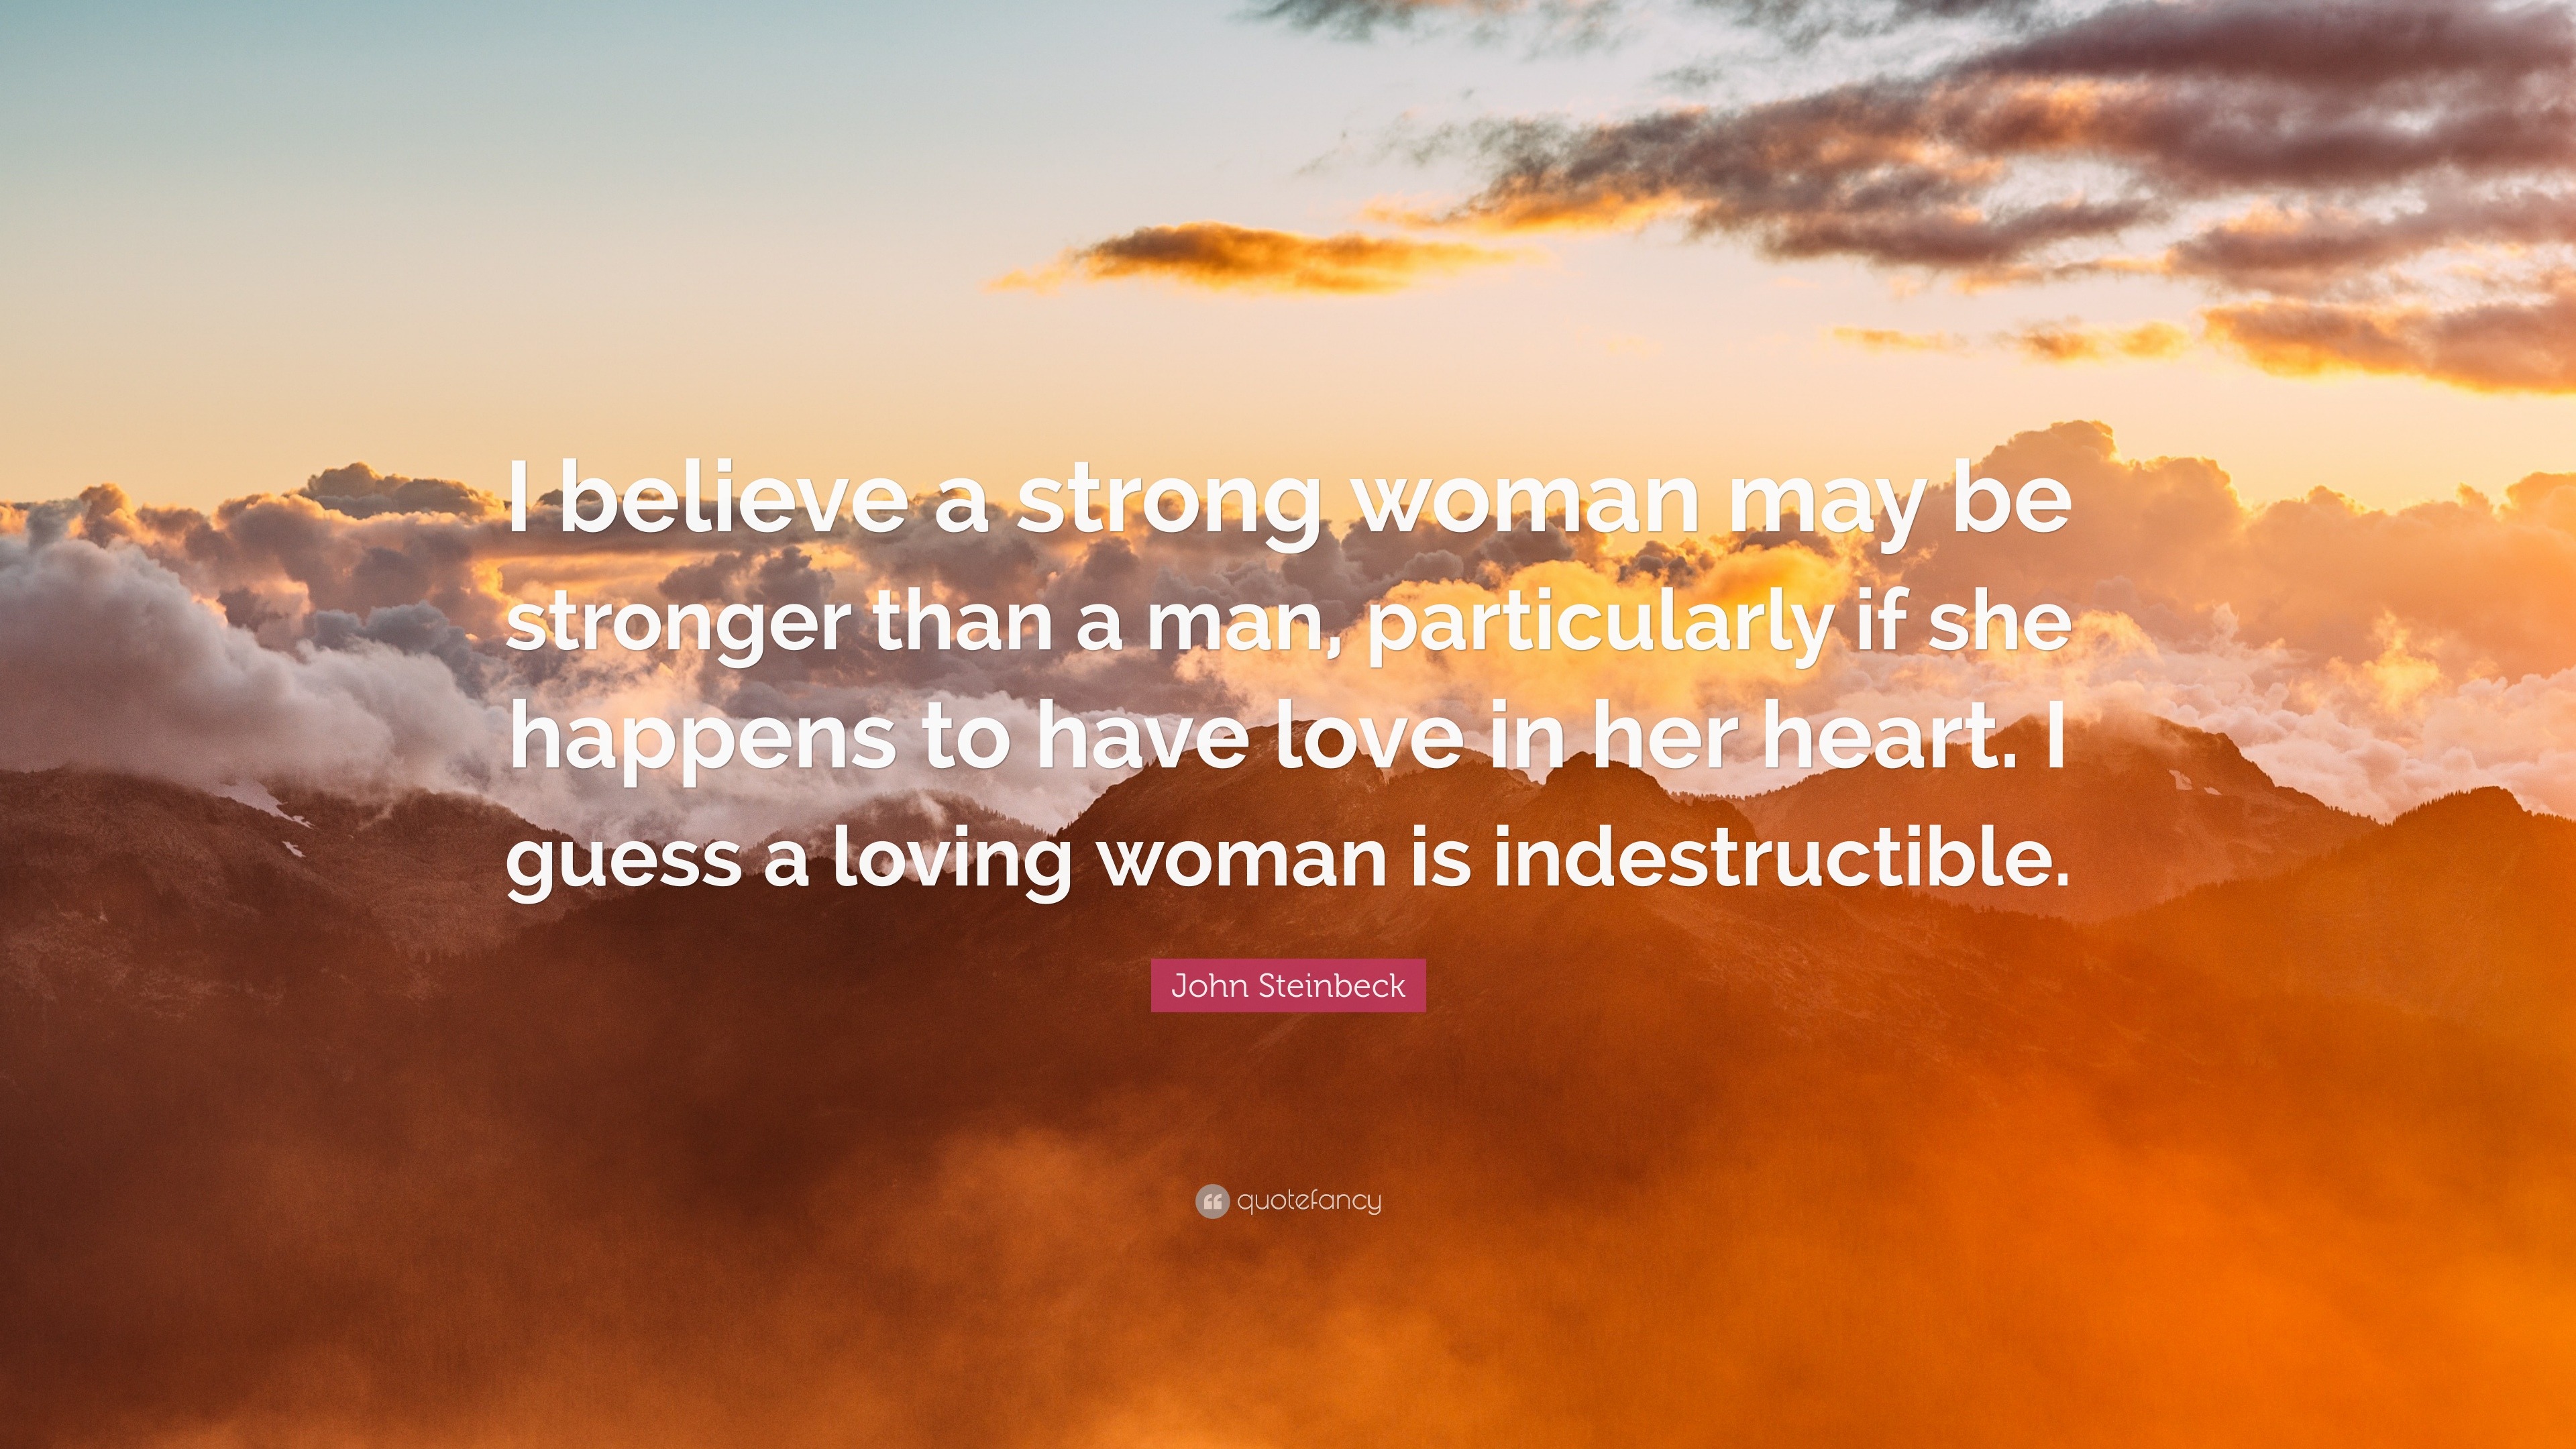 John Steinbeck Quote: “I believe a strong woman may be stronger than a ...